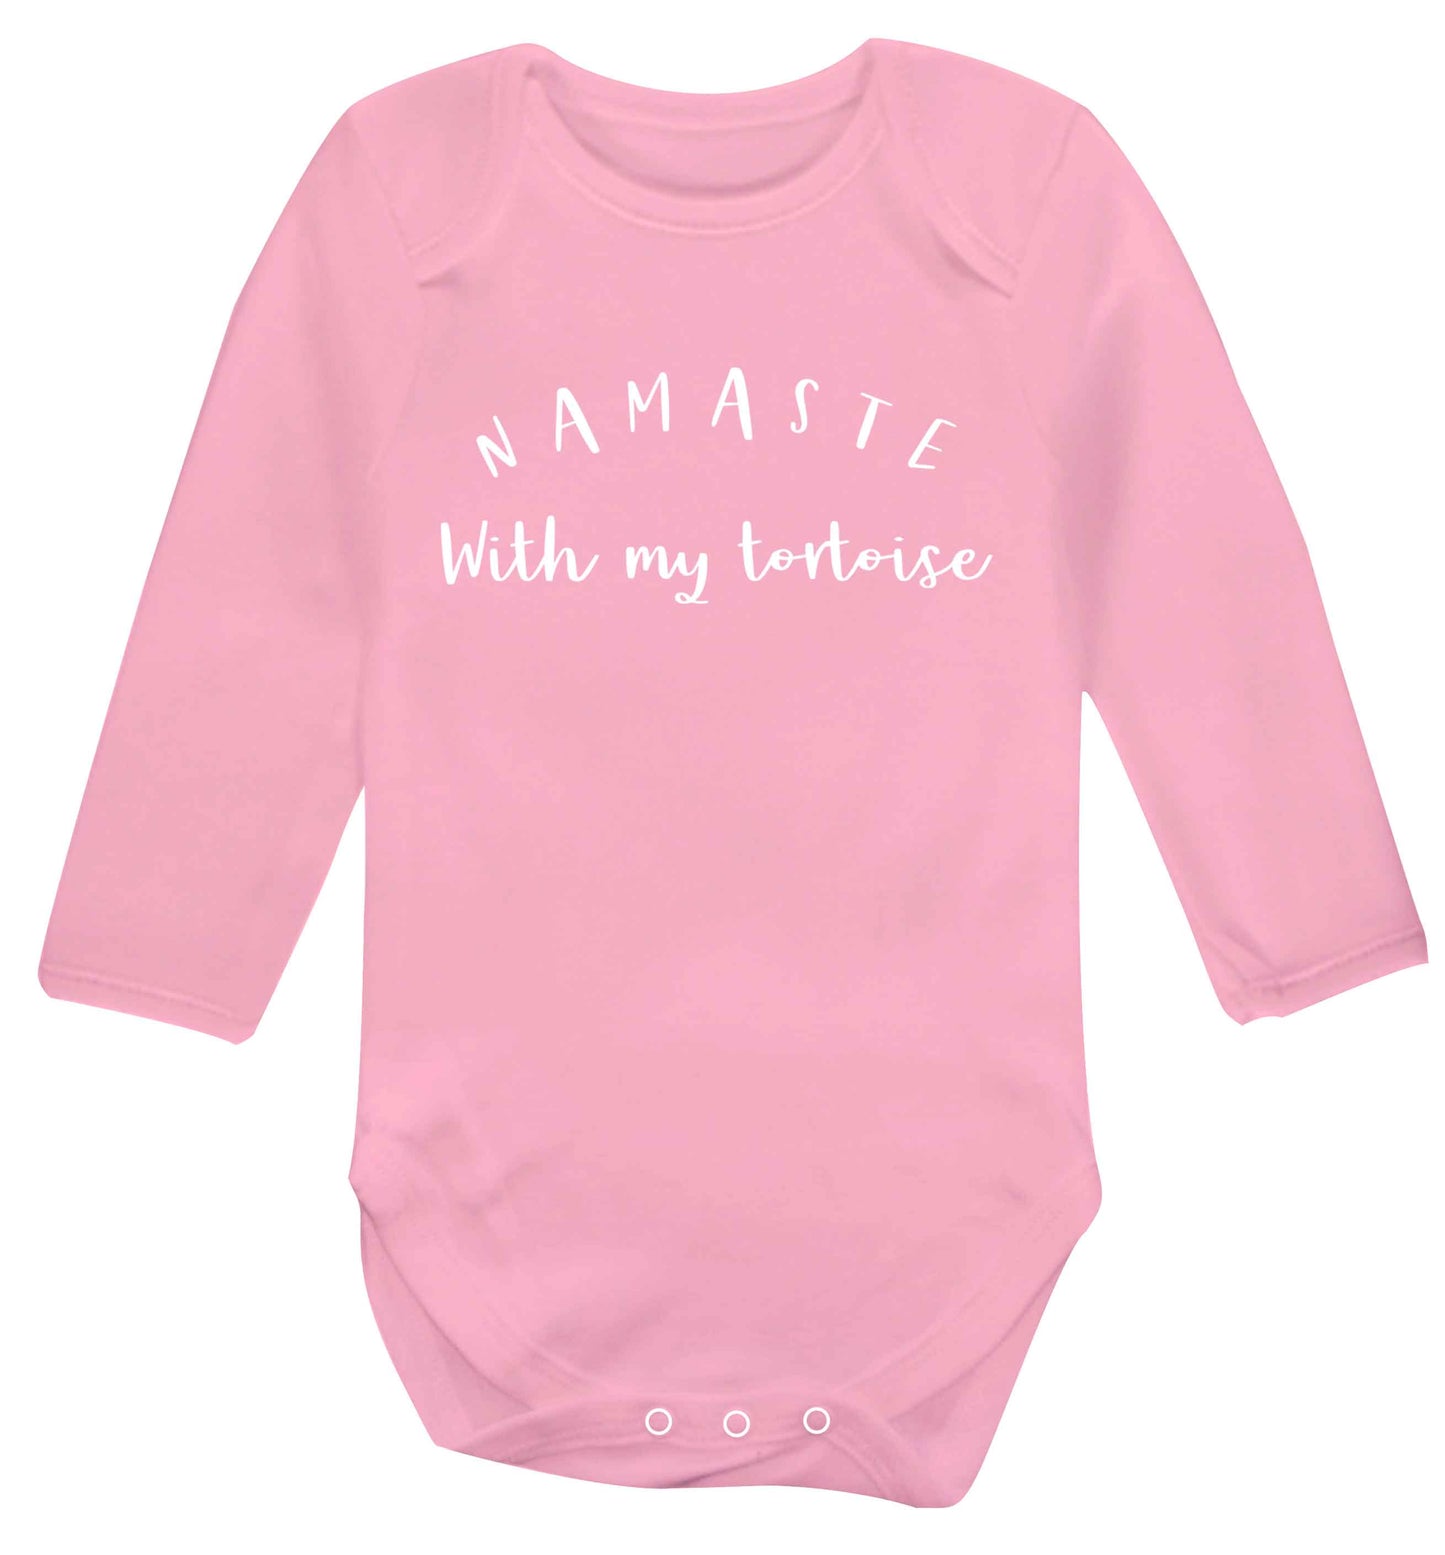 Namaste with my tortoise Baby Vest long sleeved pale pink 6-12 months